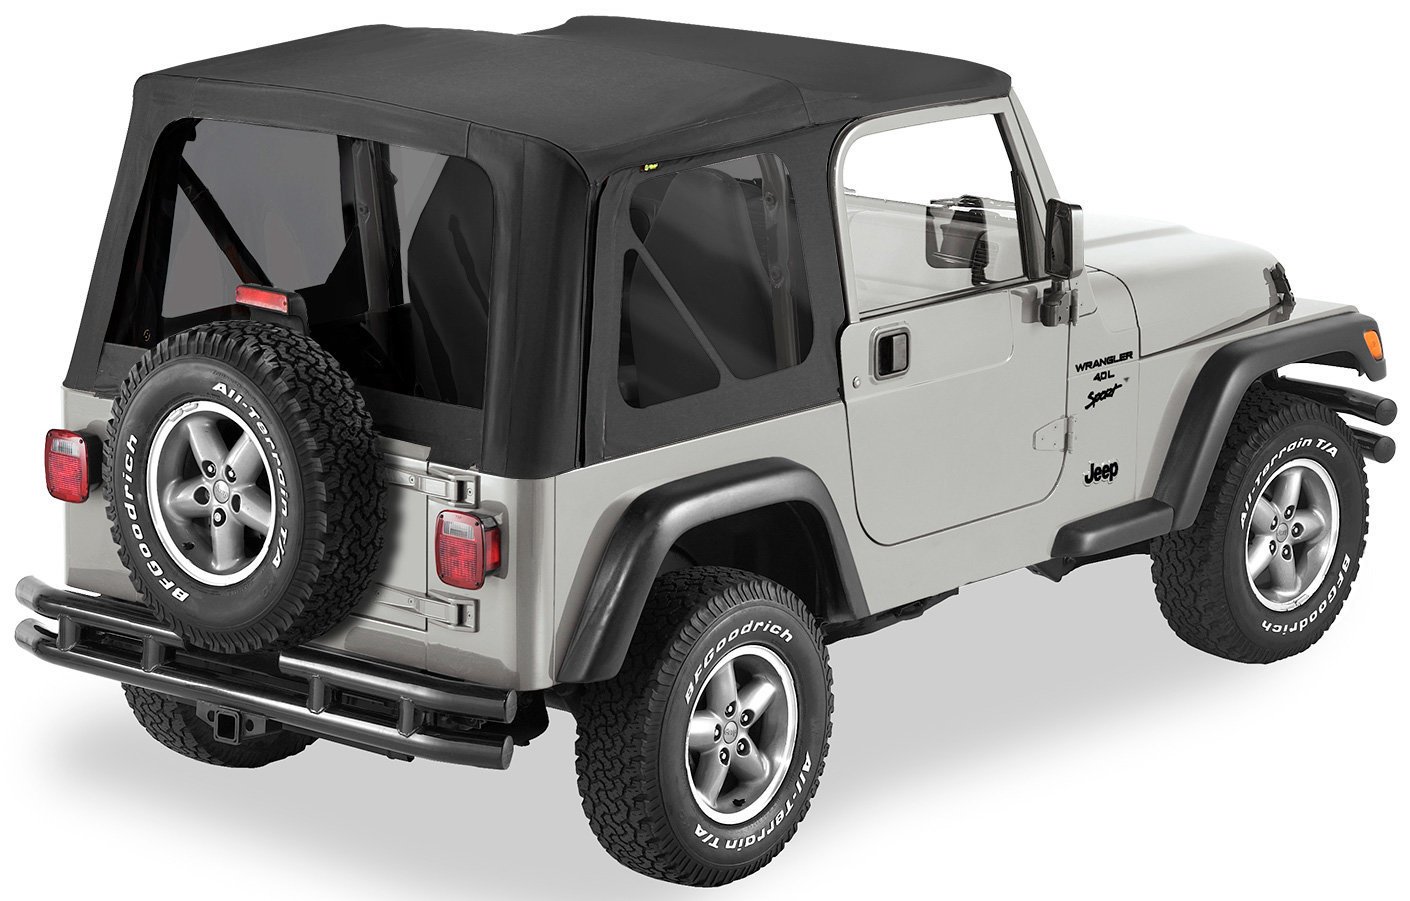 Bestop Supertop NX Soft Top with Tinted Windows without Upper Doors for  97-06 Jeep Wrangler TJ | Quadratec